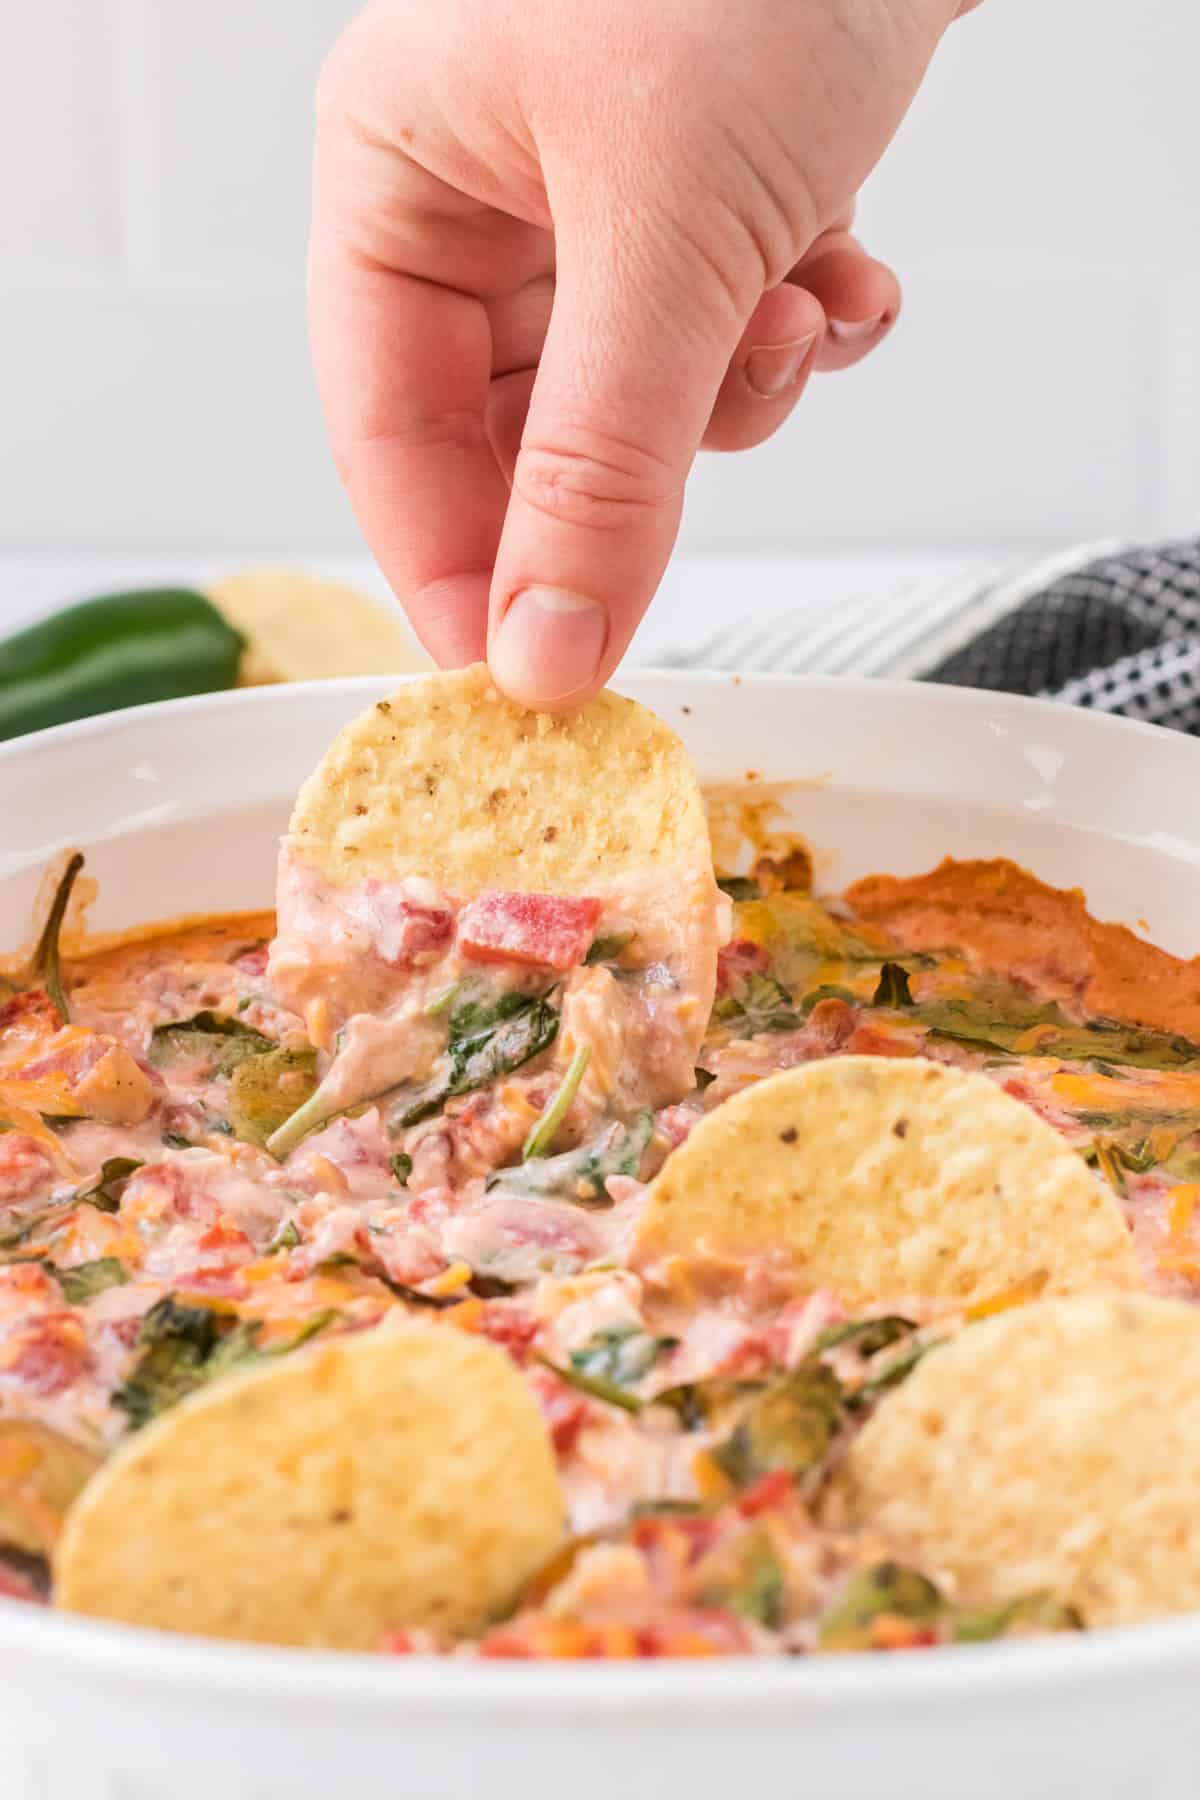 Hand dipping a tortilla chip into spinach queso dip with more chips in foreground placed in dish of dip.